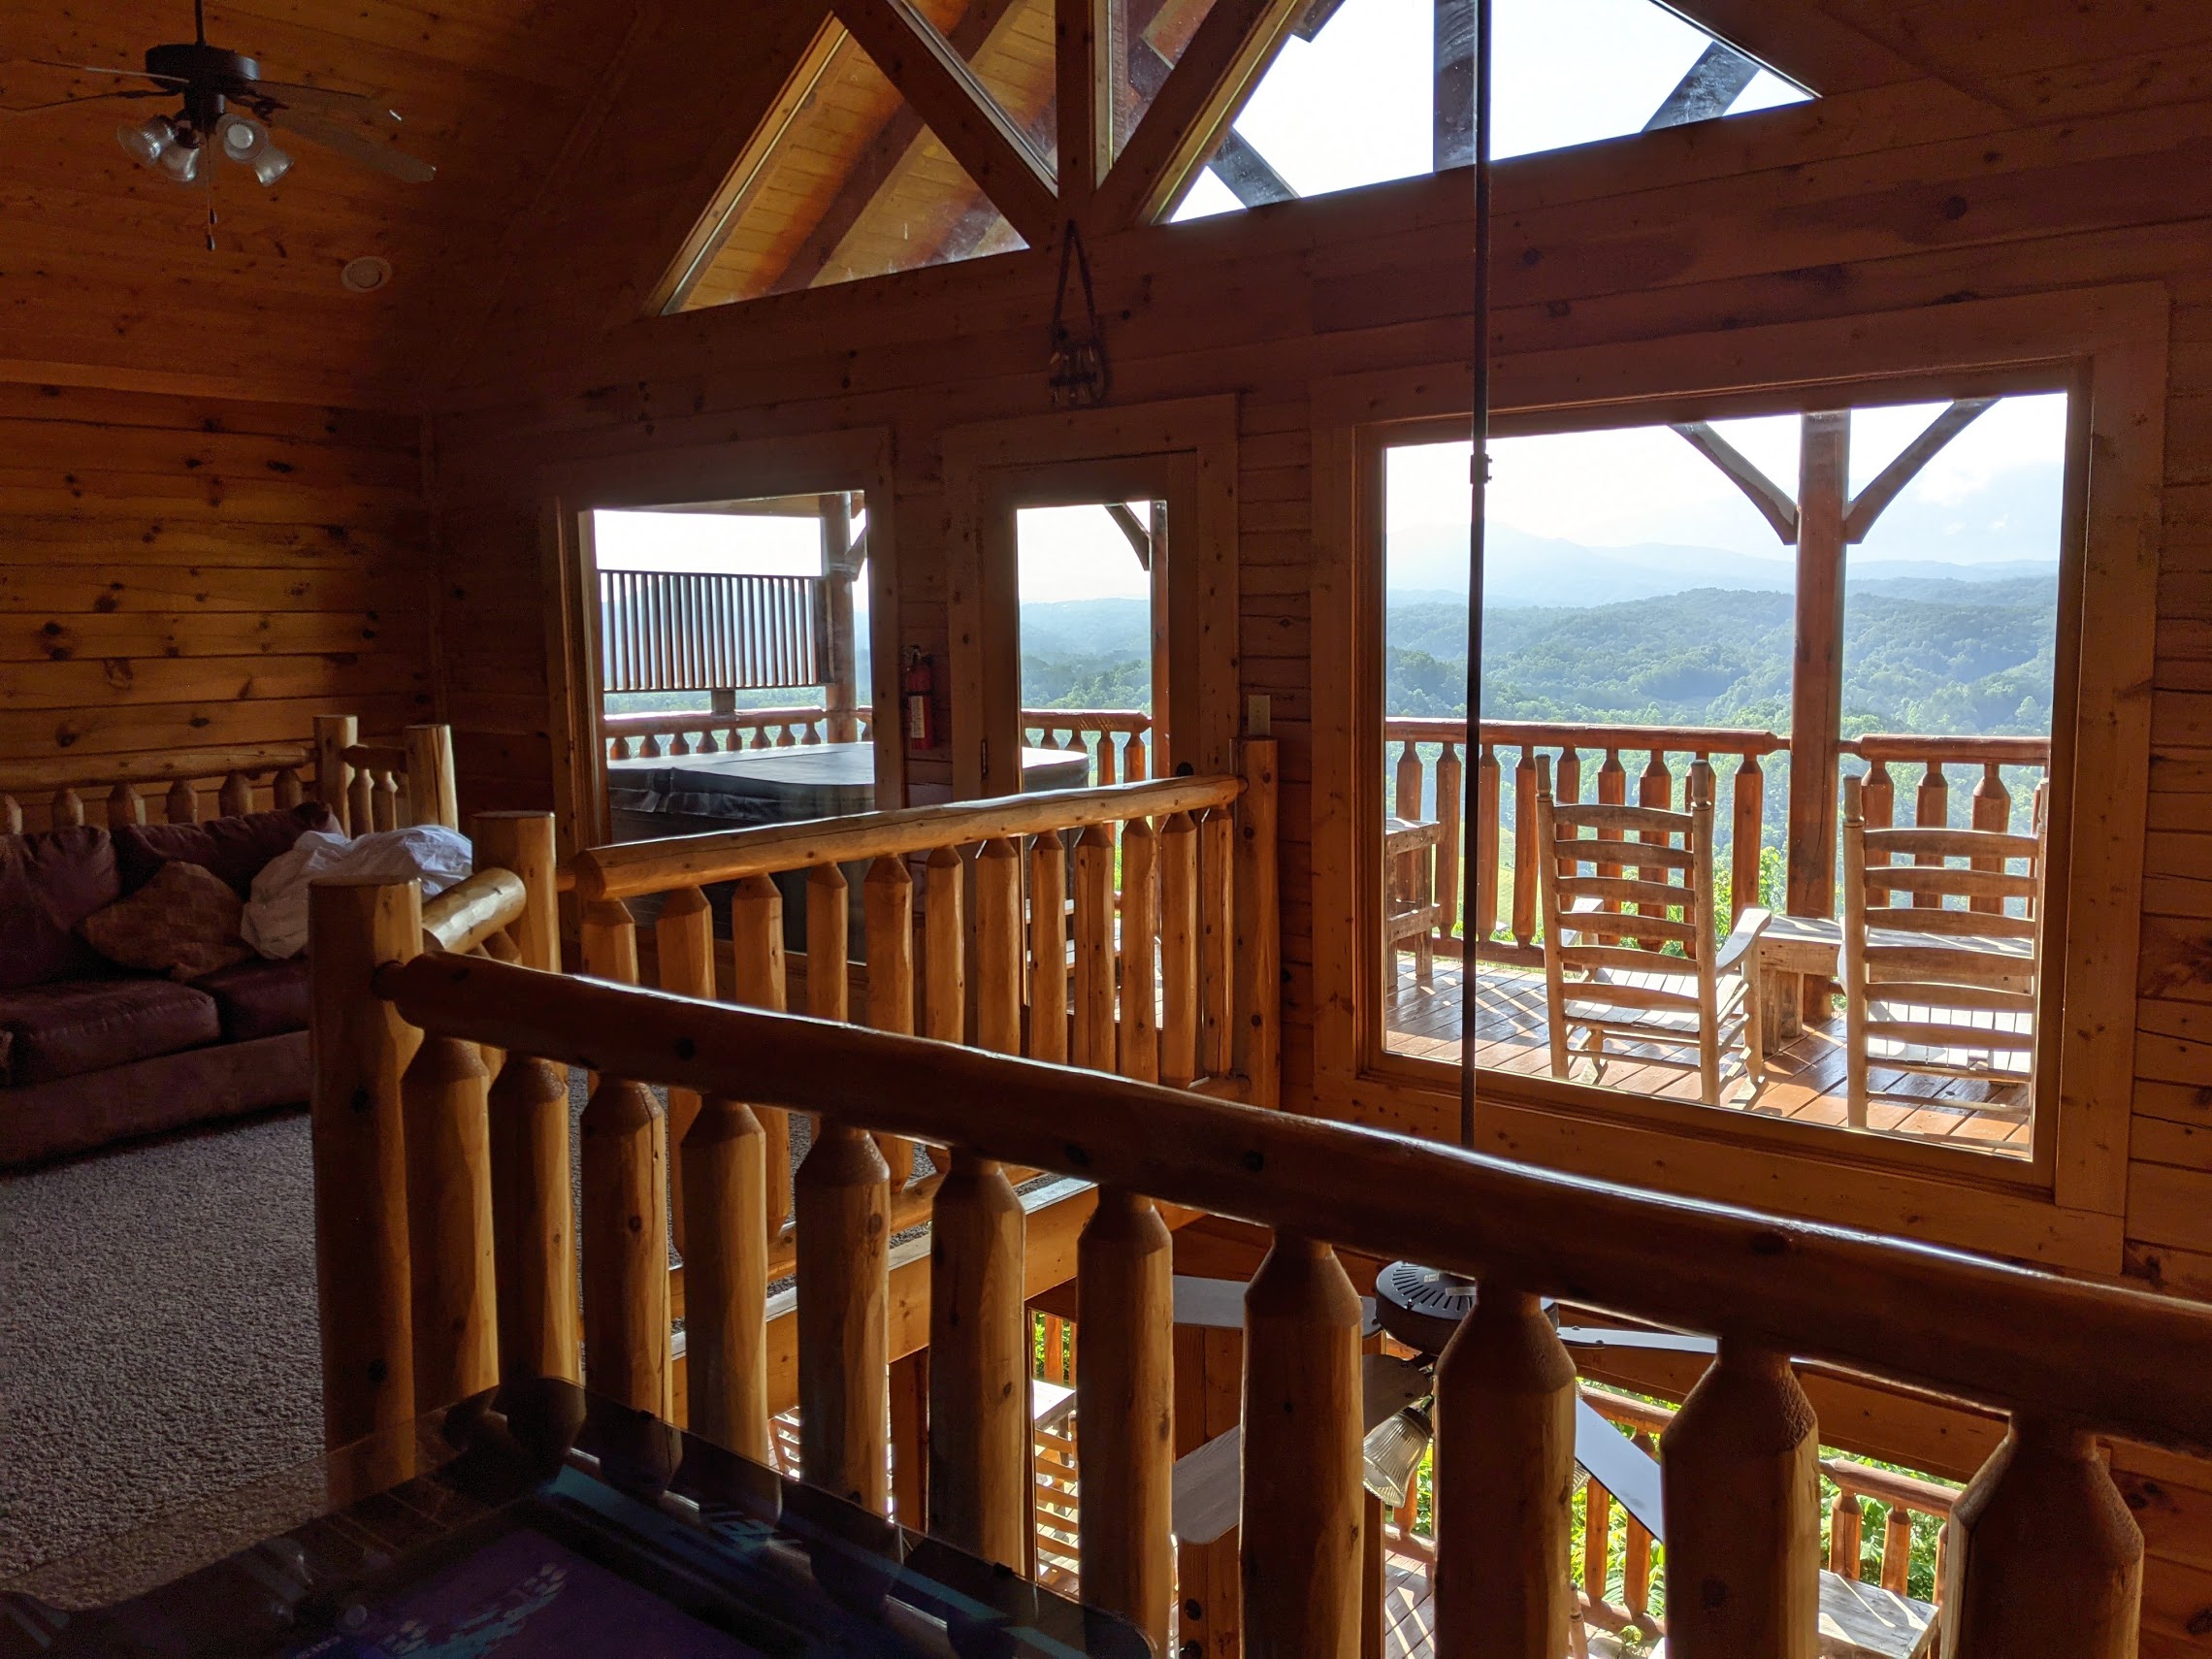 a view of a log cabin from a balcony